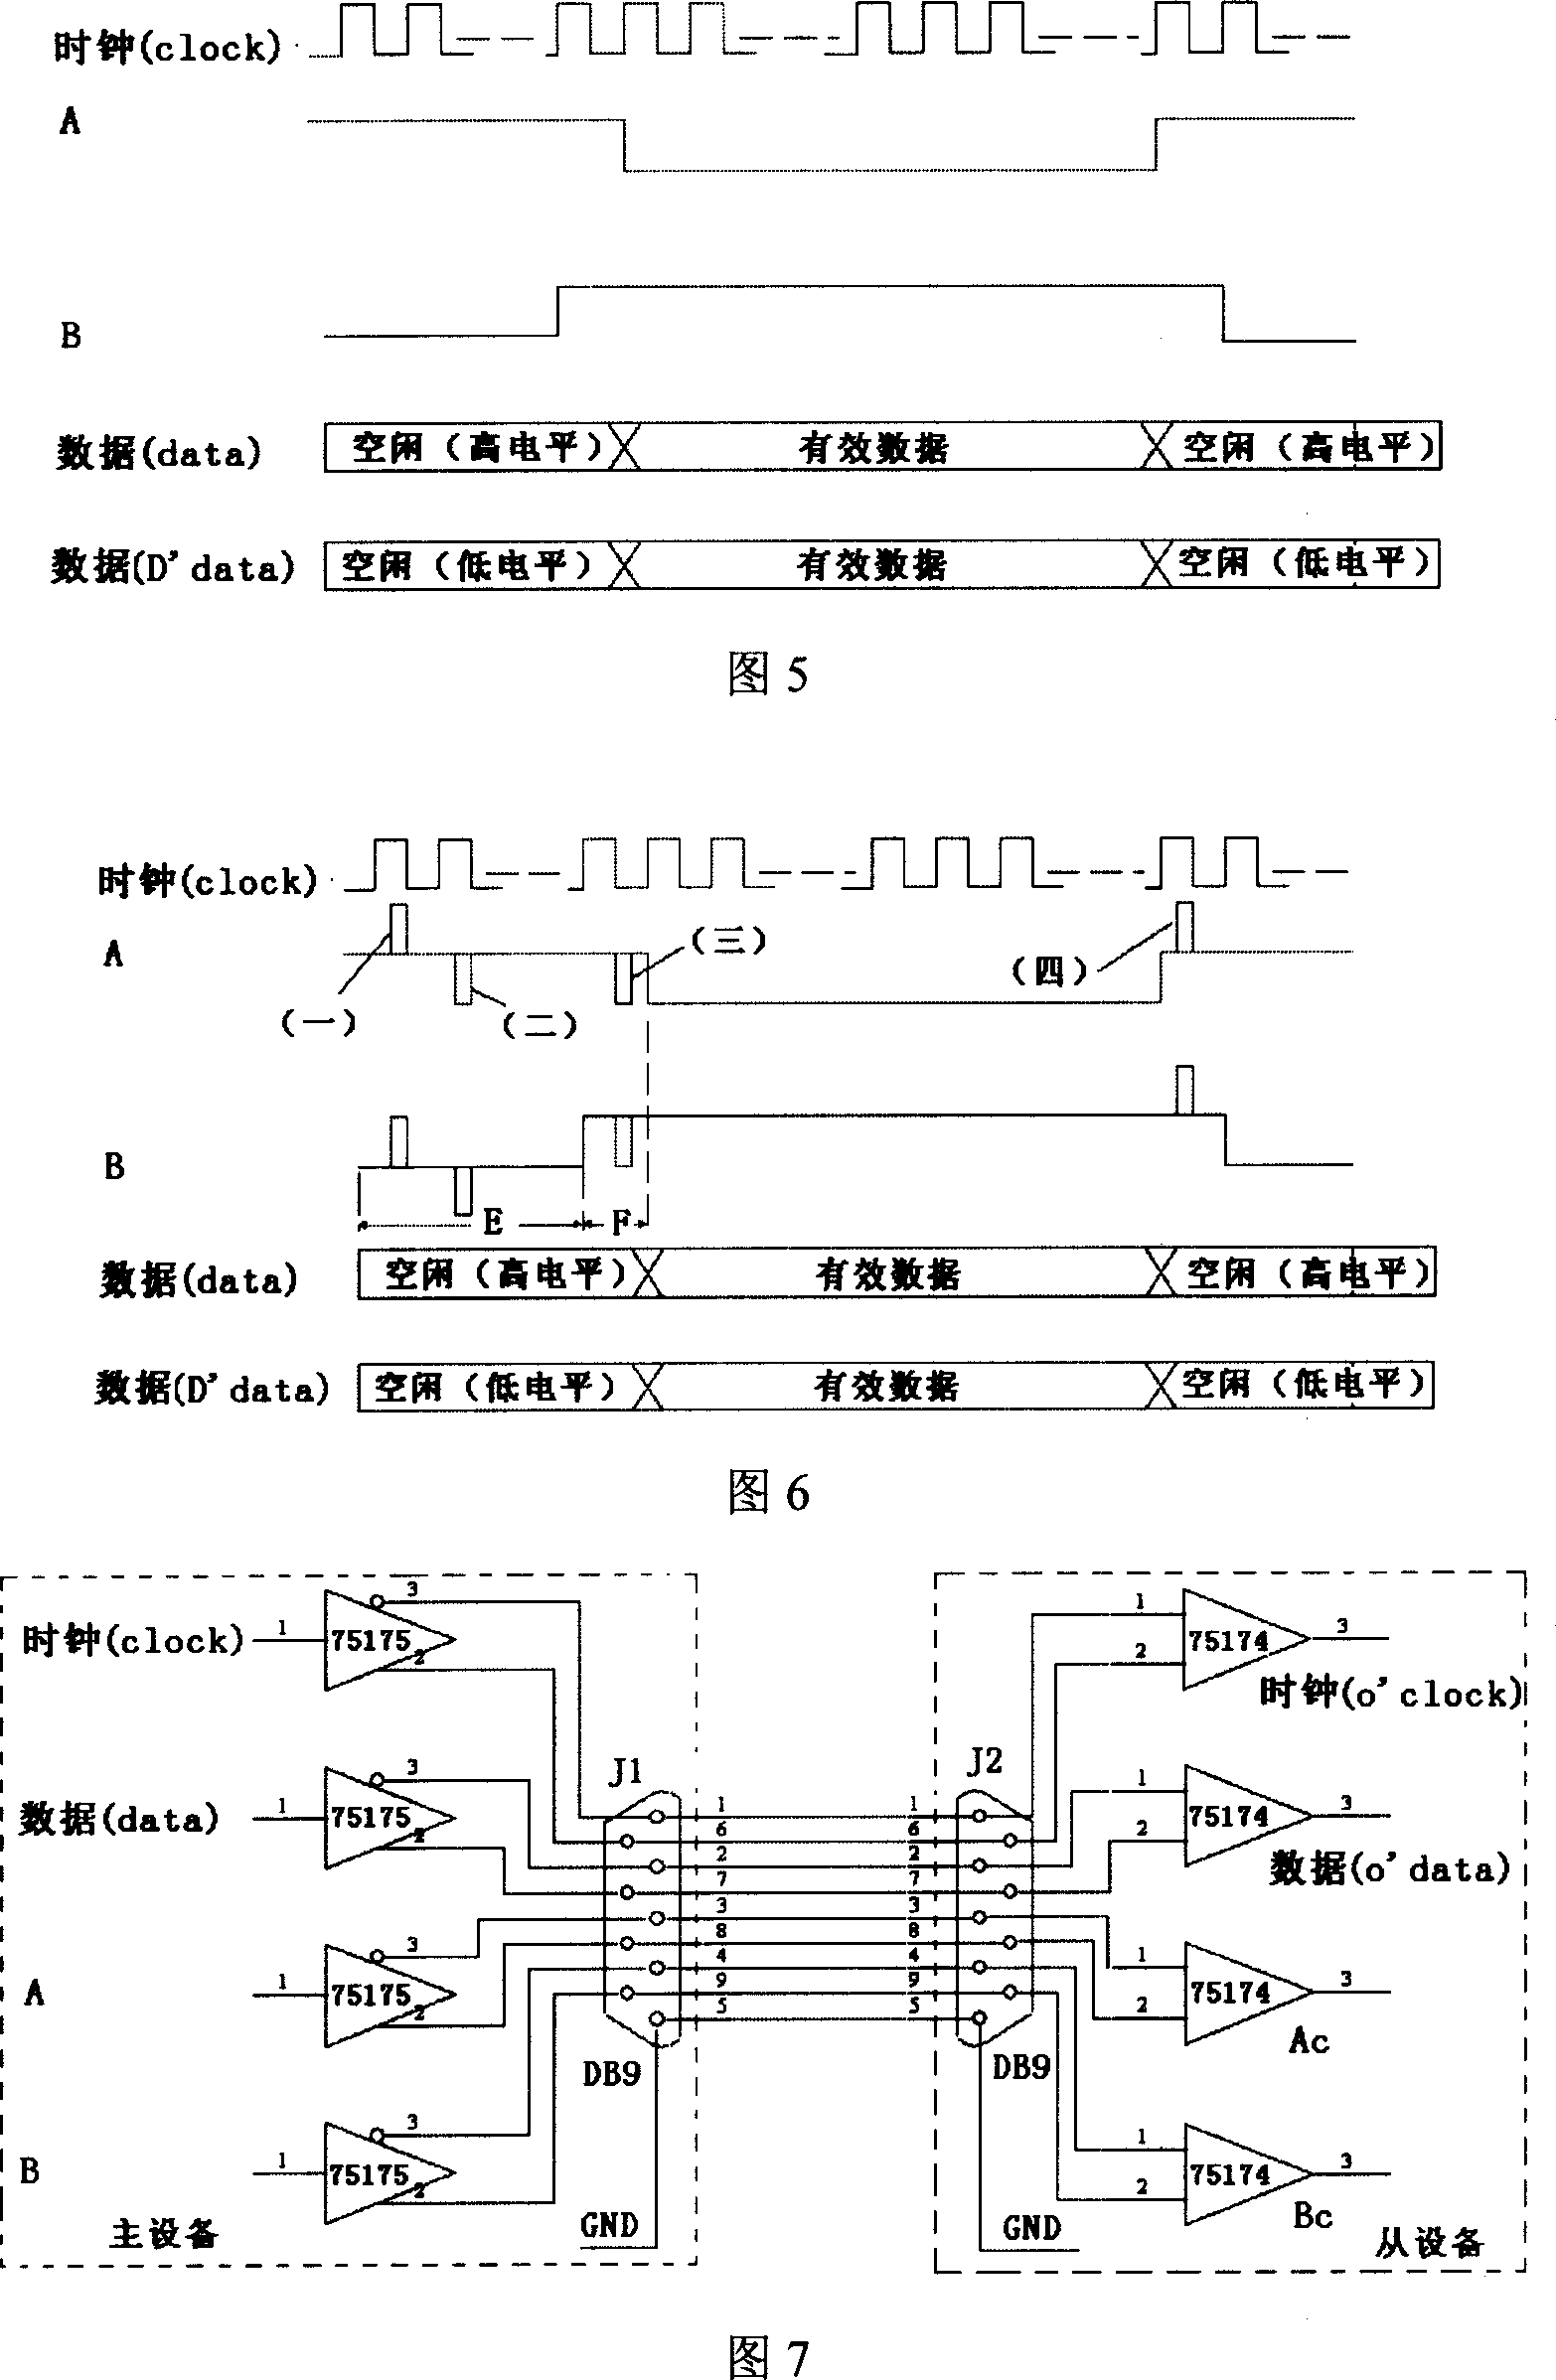 RS485 character-oriented anti-interference device against idle synchronous serial communication bus